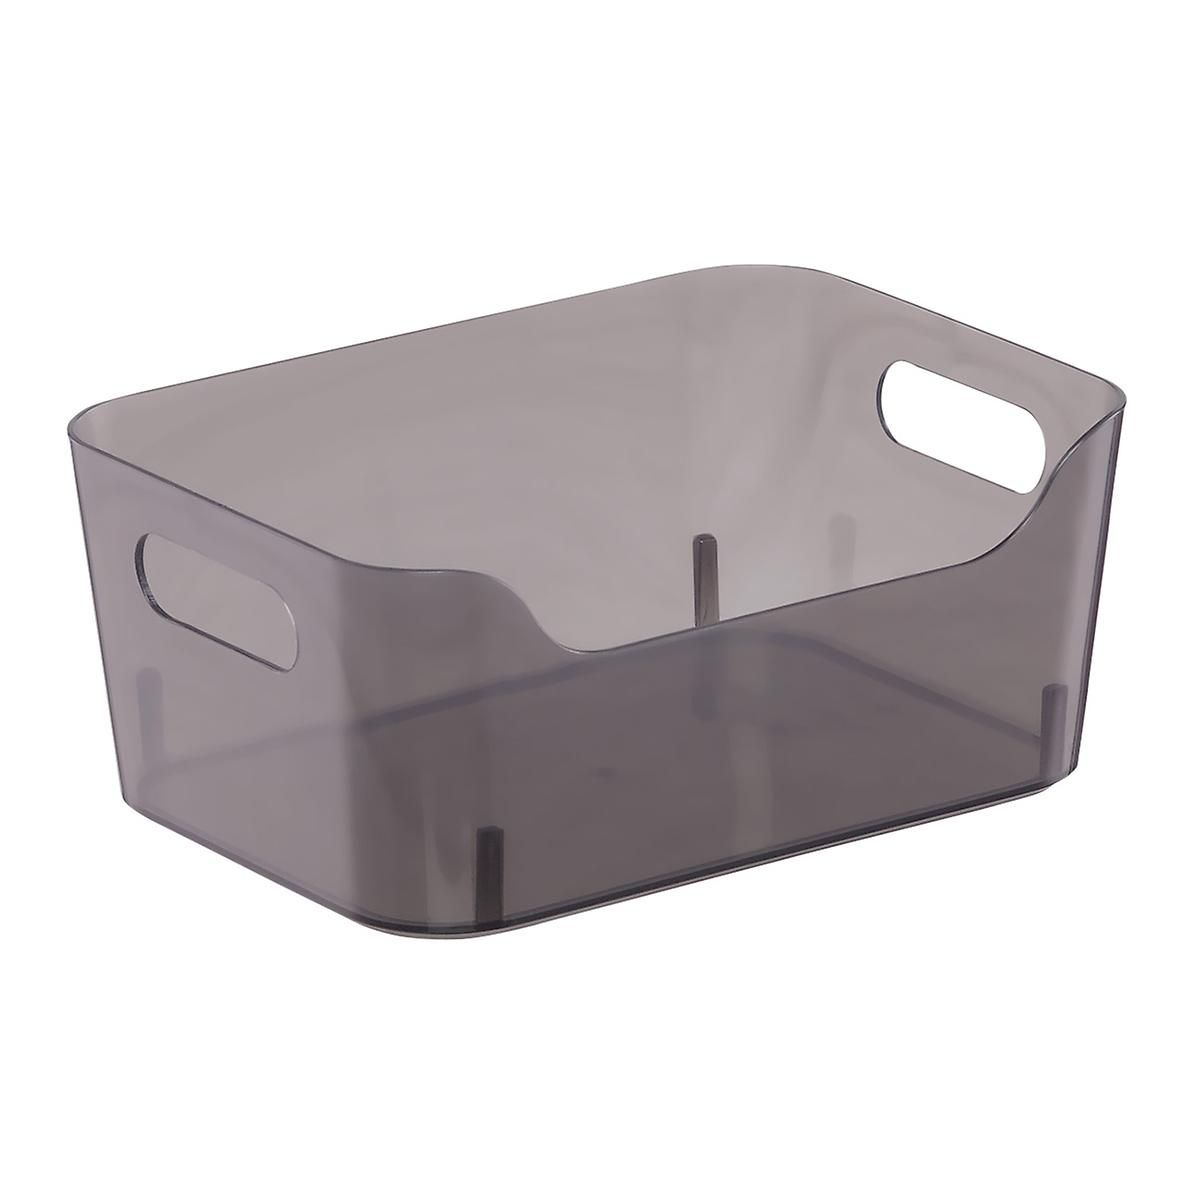 Smoke Plastic Storage Bins with Handles | The Container Store